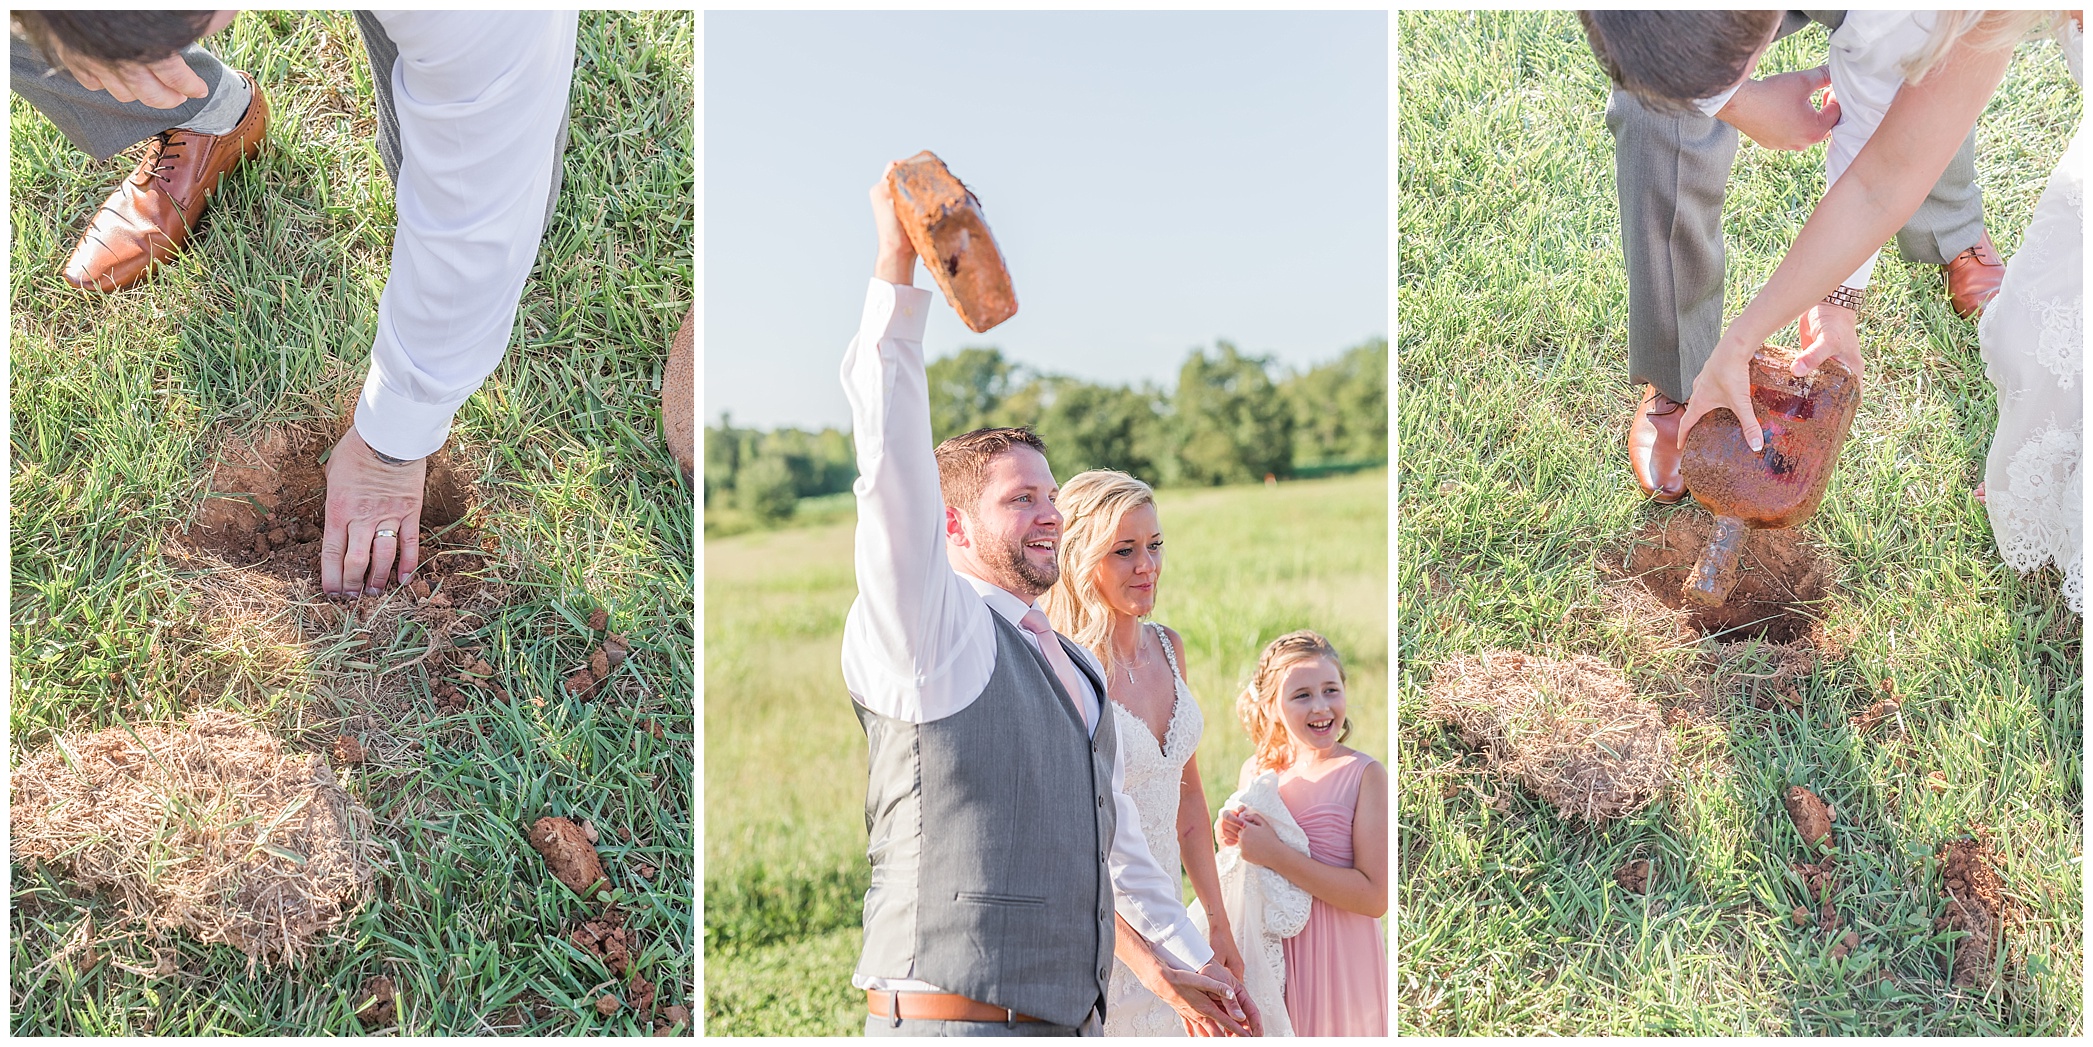  Derek and Kelsey took part of the old tradition of burying the bourbon for your wedding day. It is said if you bury a bottle of bourbon before your wedding day at the venue it will not rain that day. Well it was a GORGEOUS day that is for sure!  